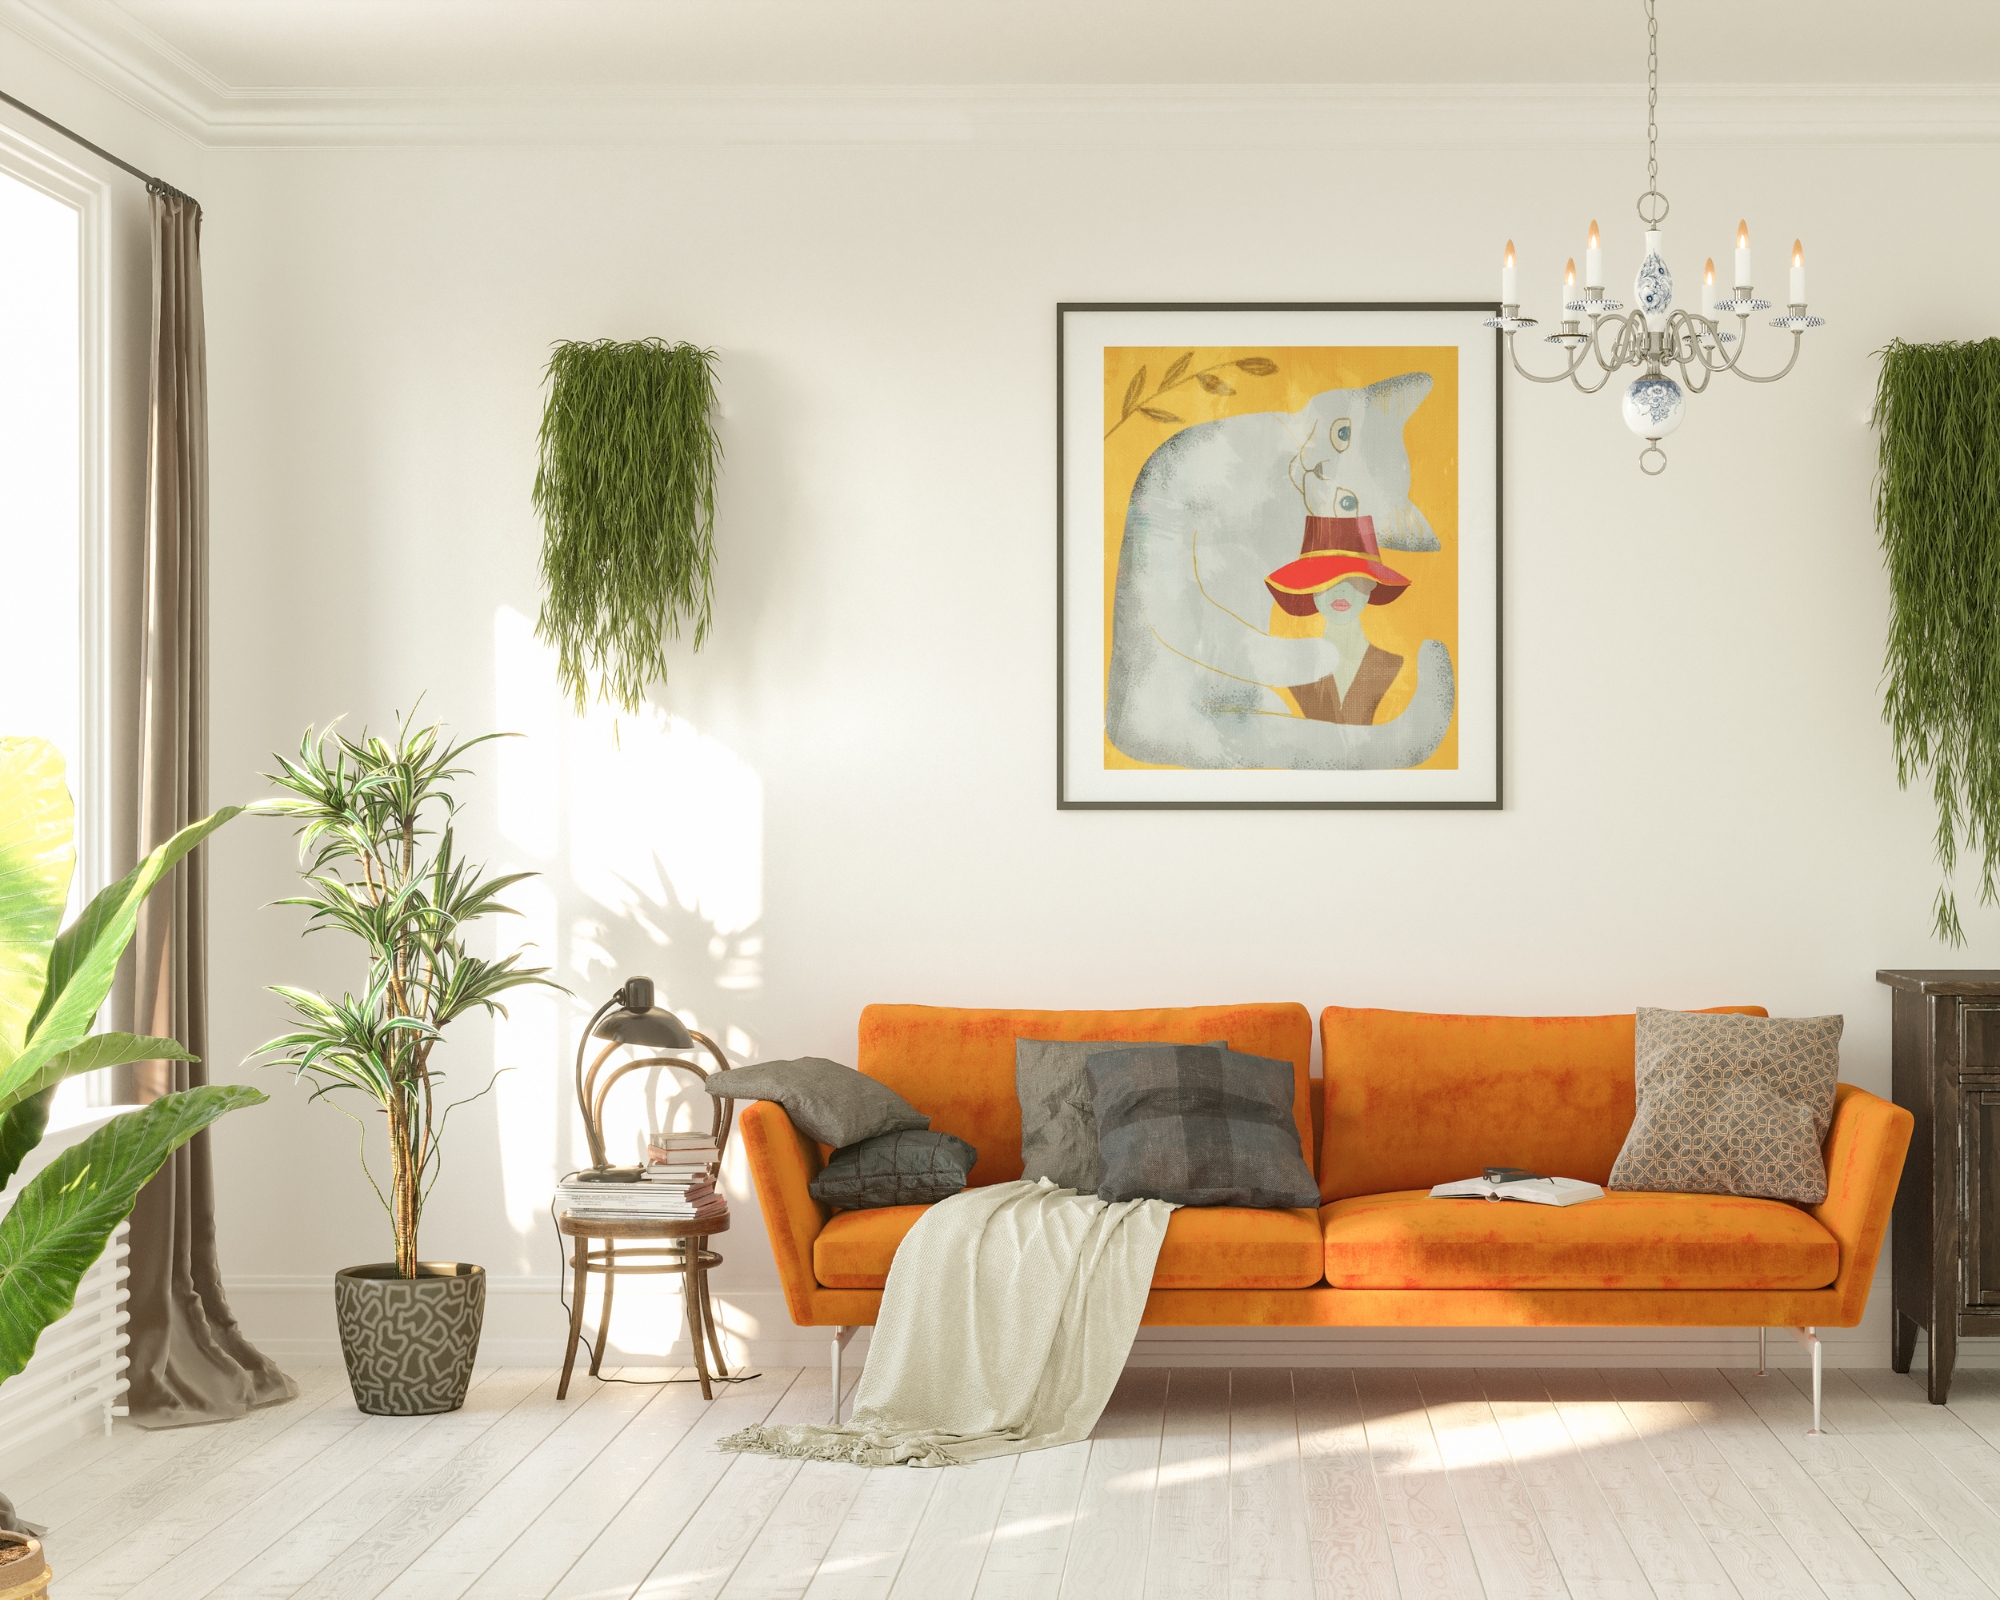 Retro living room with orange couch and painting of a cat on the wall